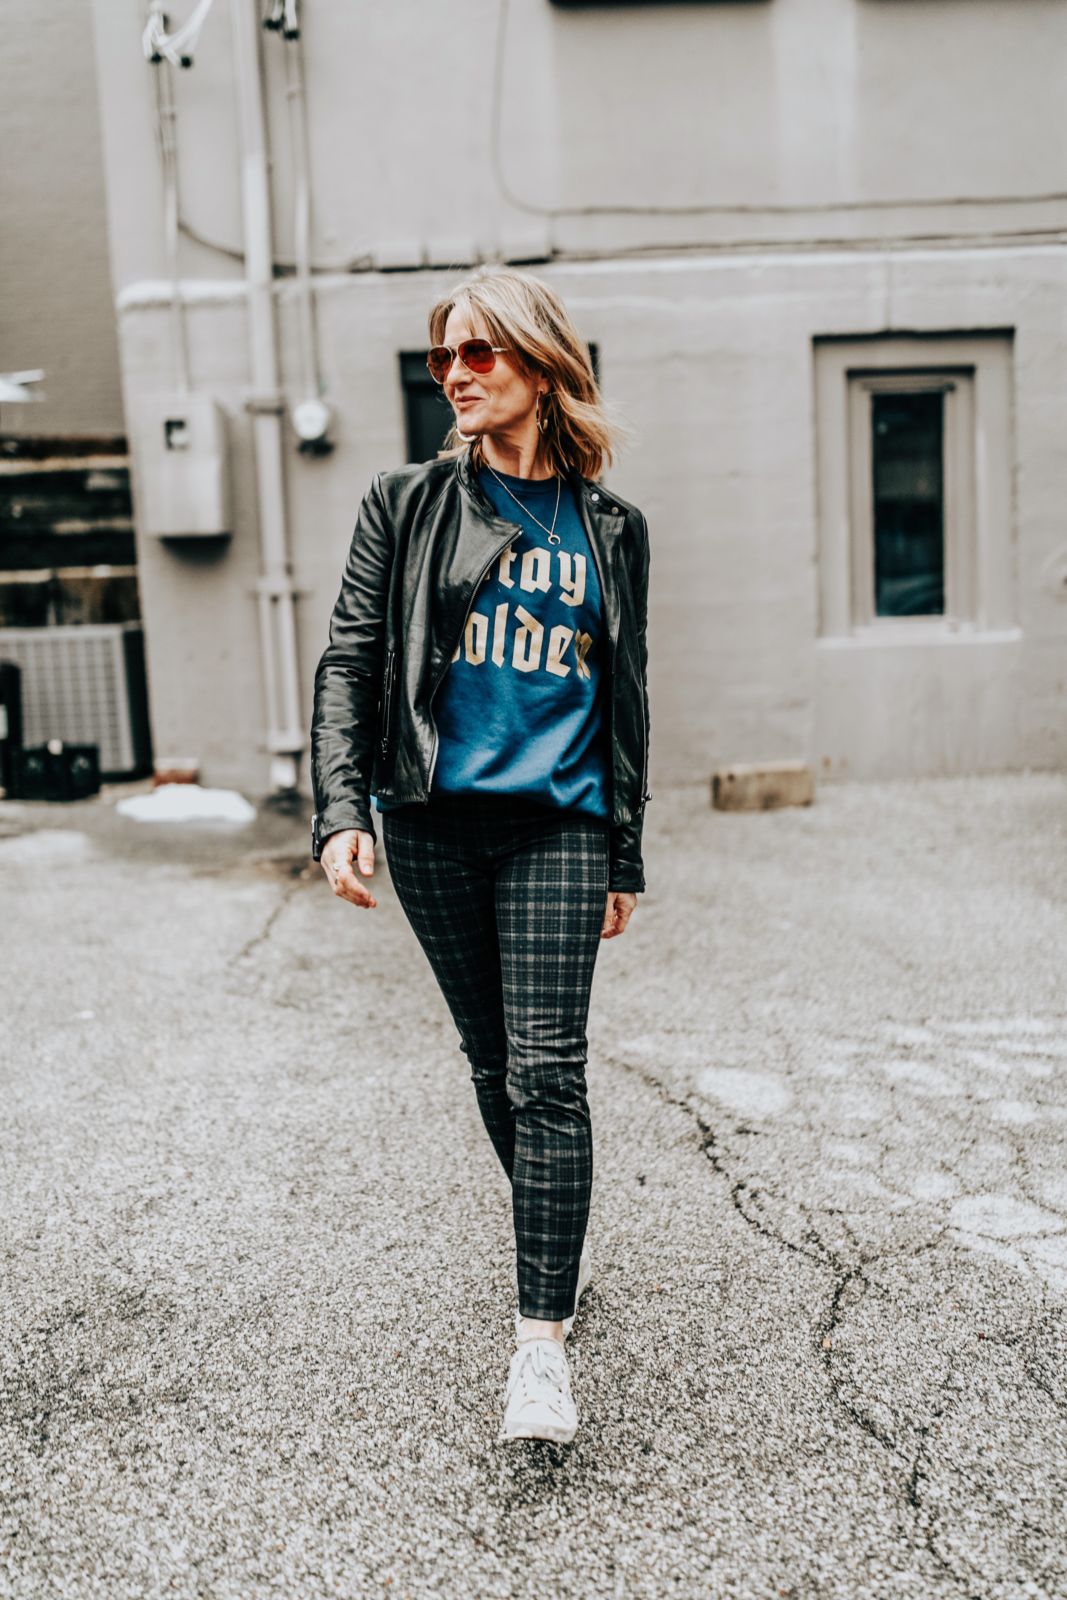 How To Style Graphic Sweatshirts